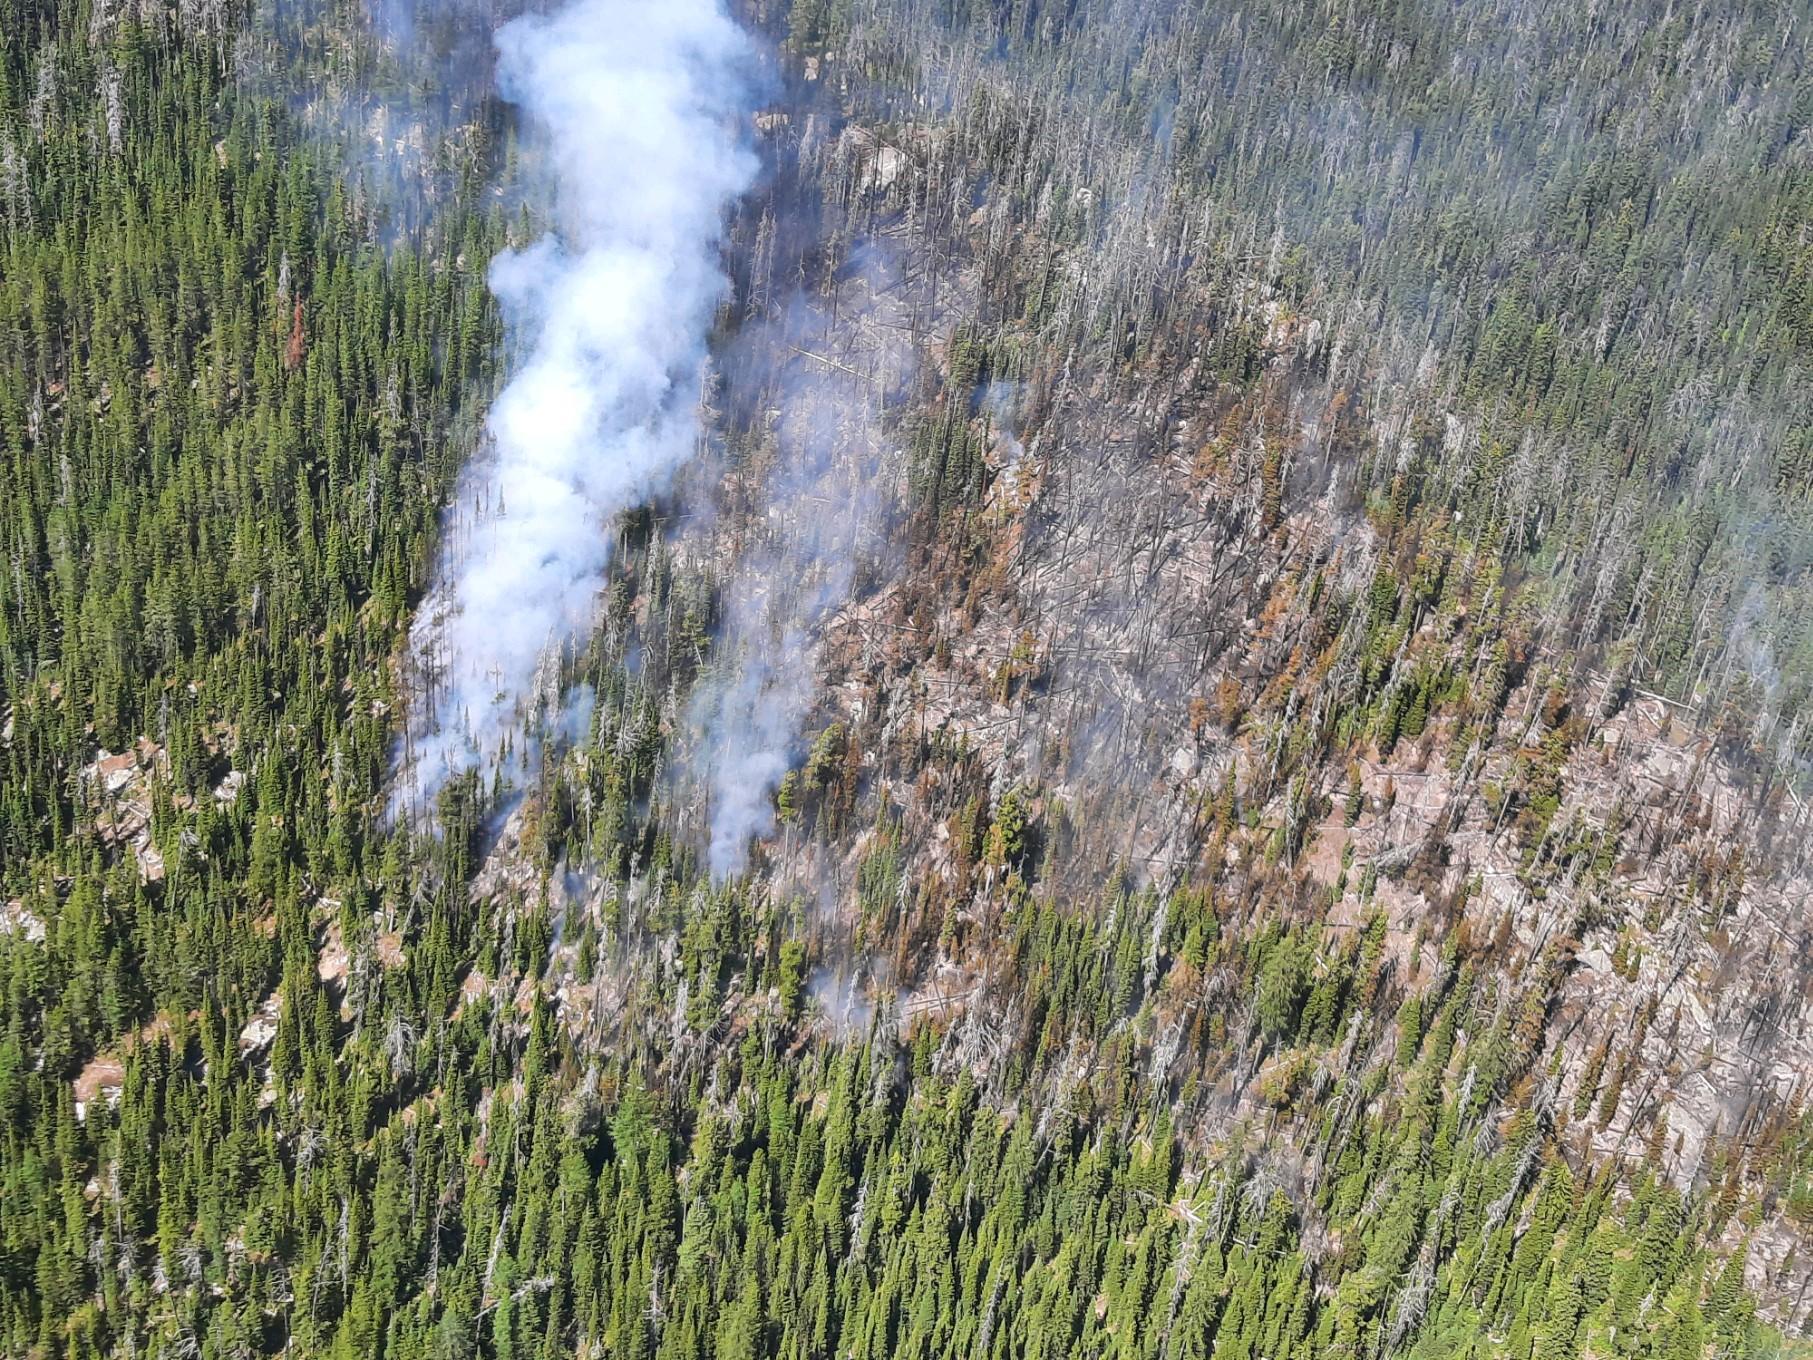 Recon flight on August 25 for Trout Fire. Photo Credit: W. Kucera, U.S. Forest Service